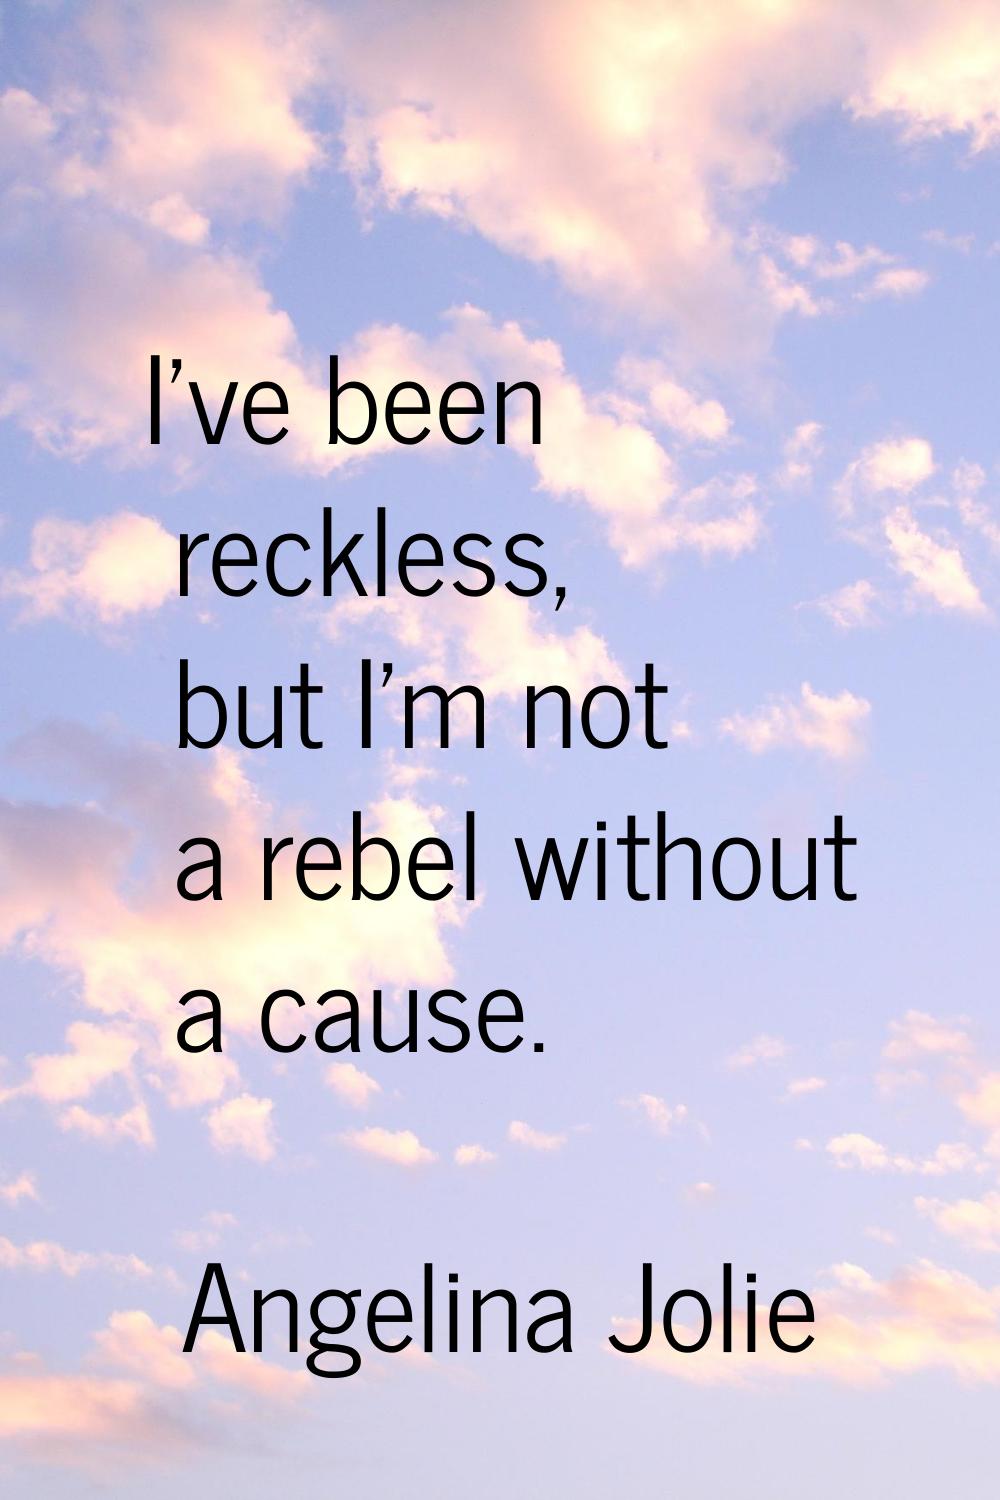 I've been reckless, but I'm not a rebel without a cause.